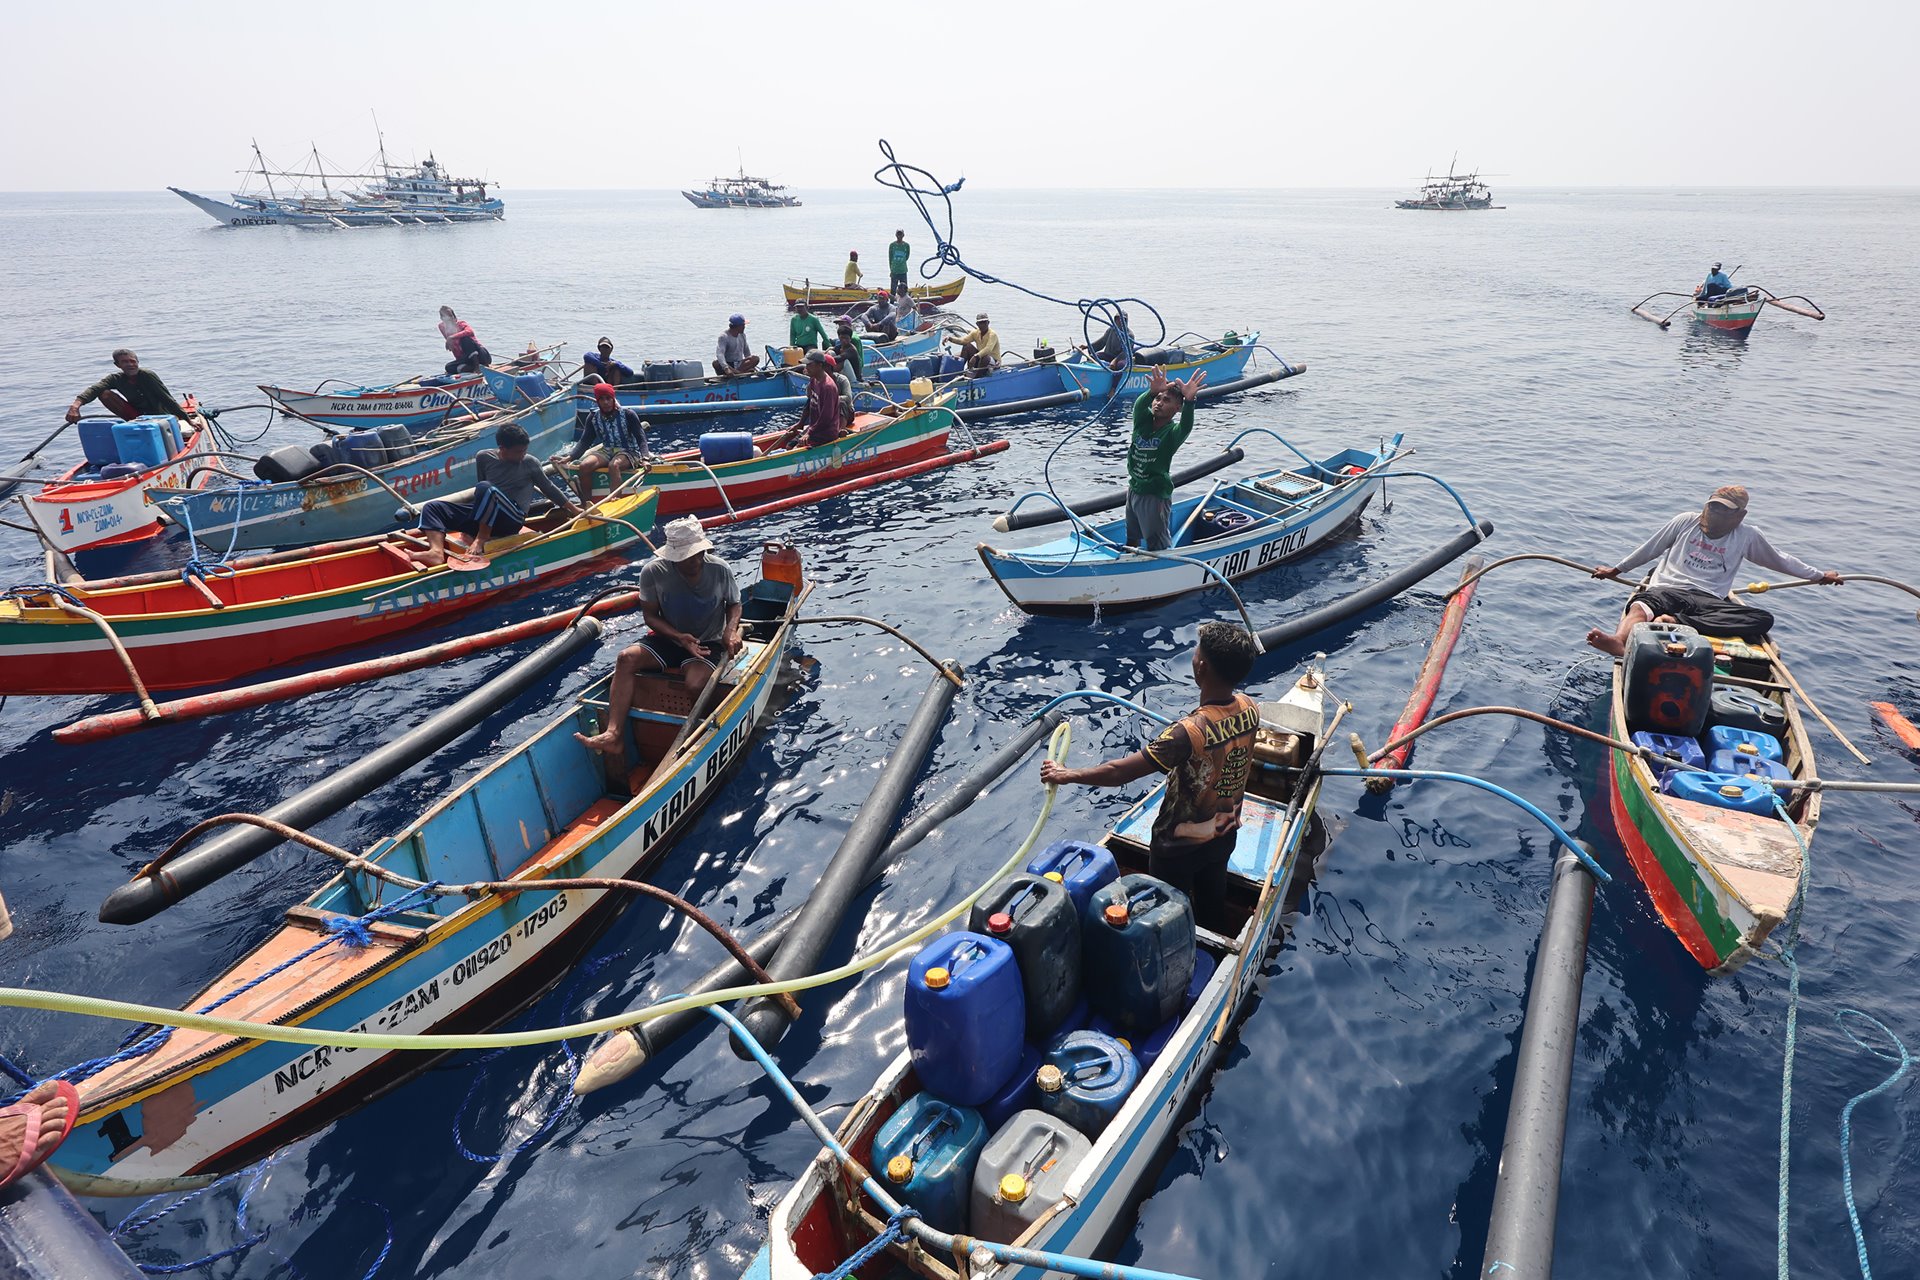 Filipino fishermen dock their boats beside a government supply ship distributing oil and food, near Scarborough Shoal, off Zambales province, Philippines.&nbsp;<br />
&nbsp;